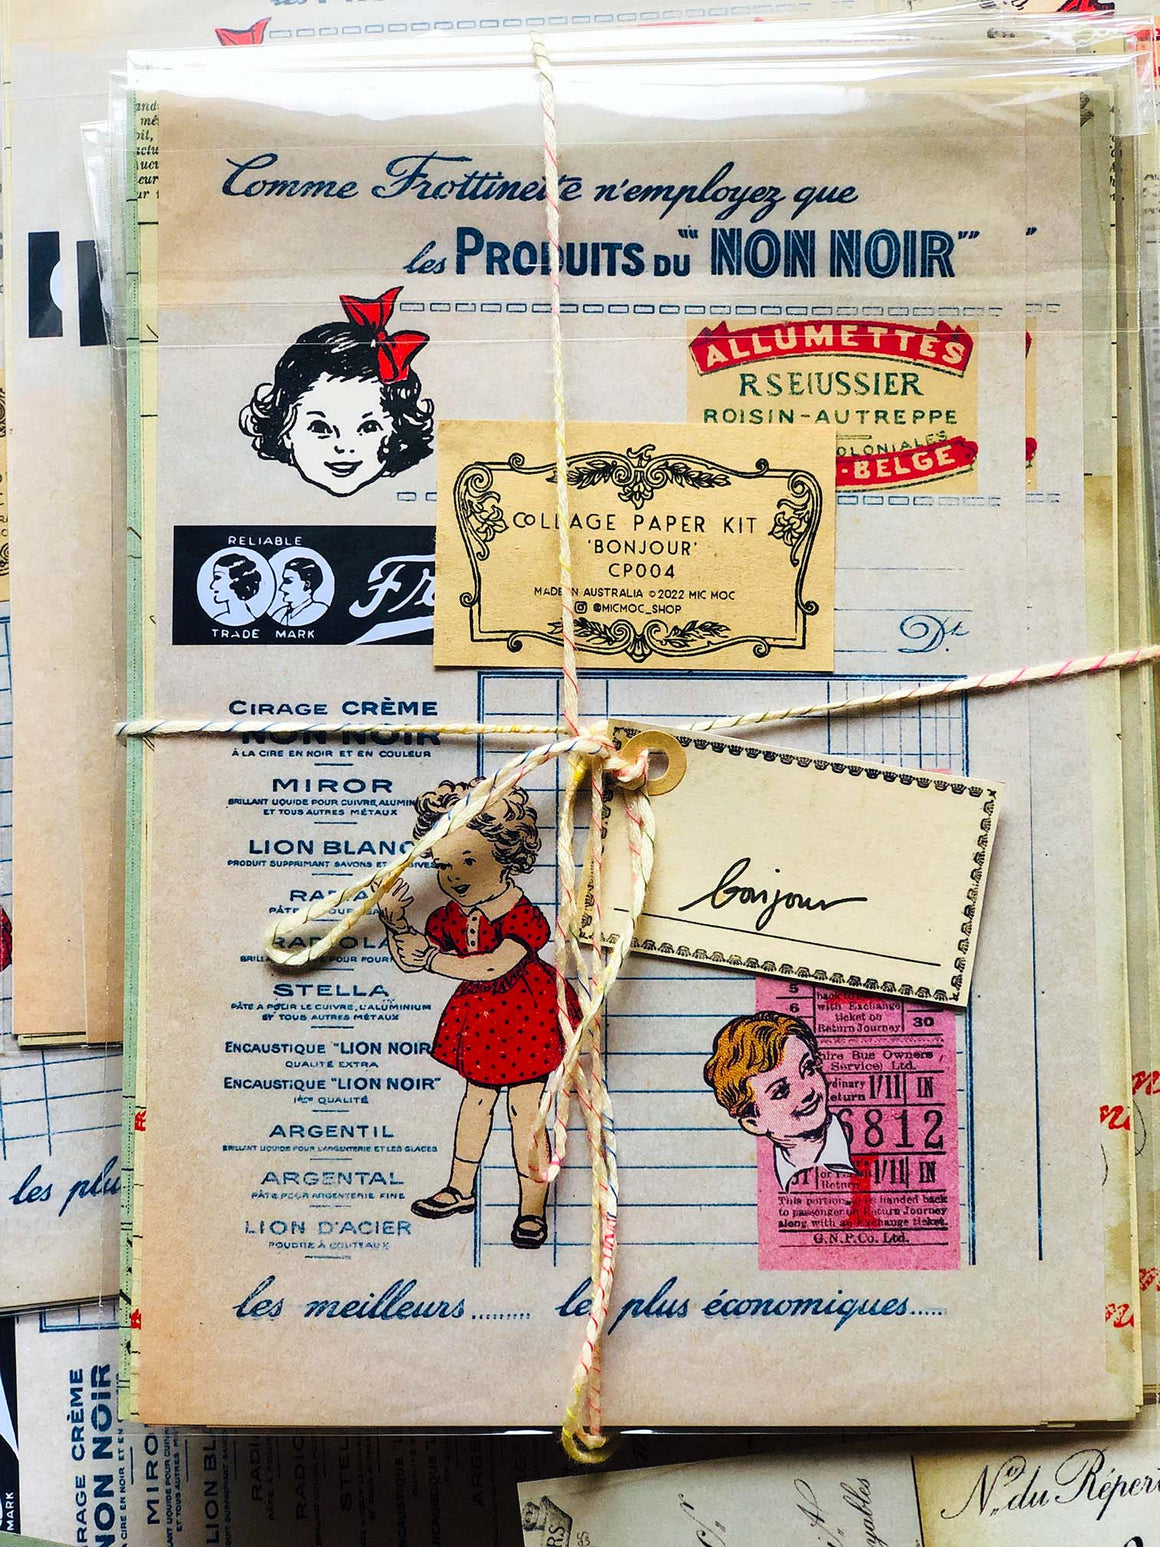 Collage Paper Kit CP004: ‘Bonjour’ (12 Pk/12 枚)紙セット「ボンジュール」by micmoc.com 